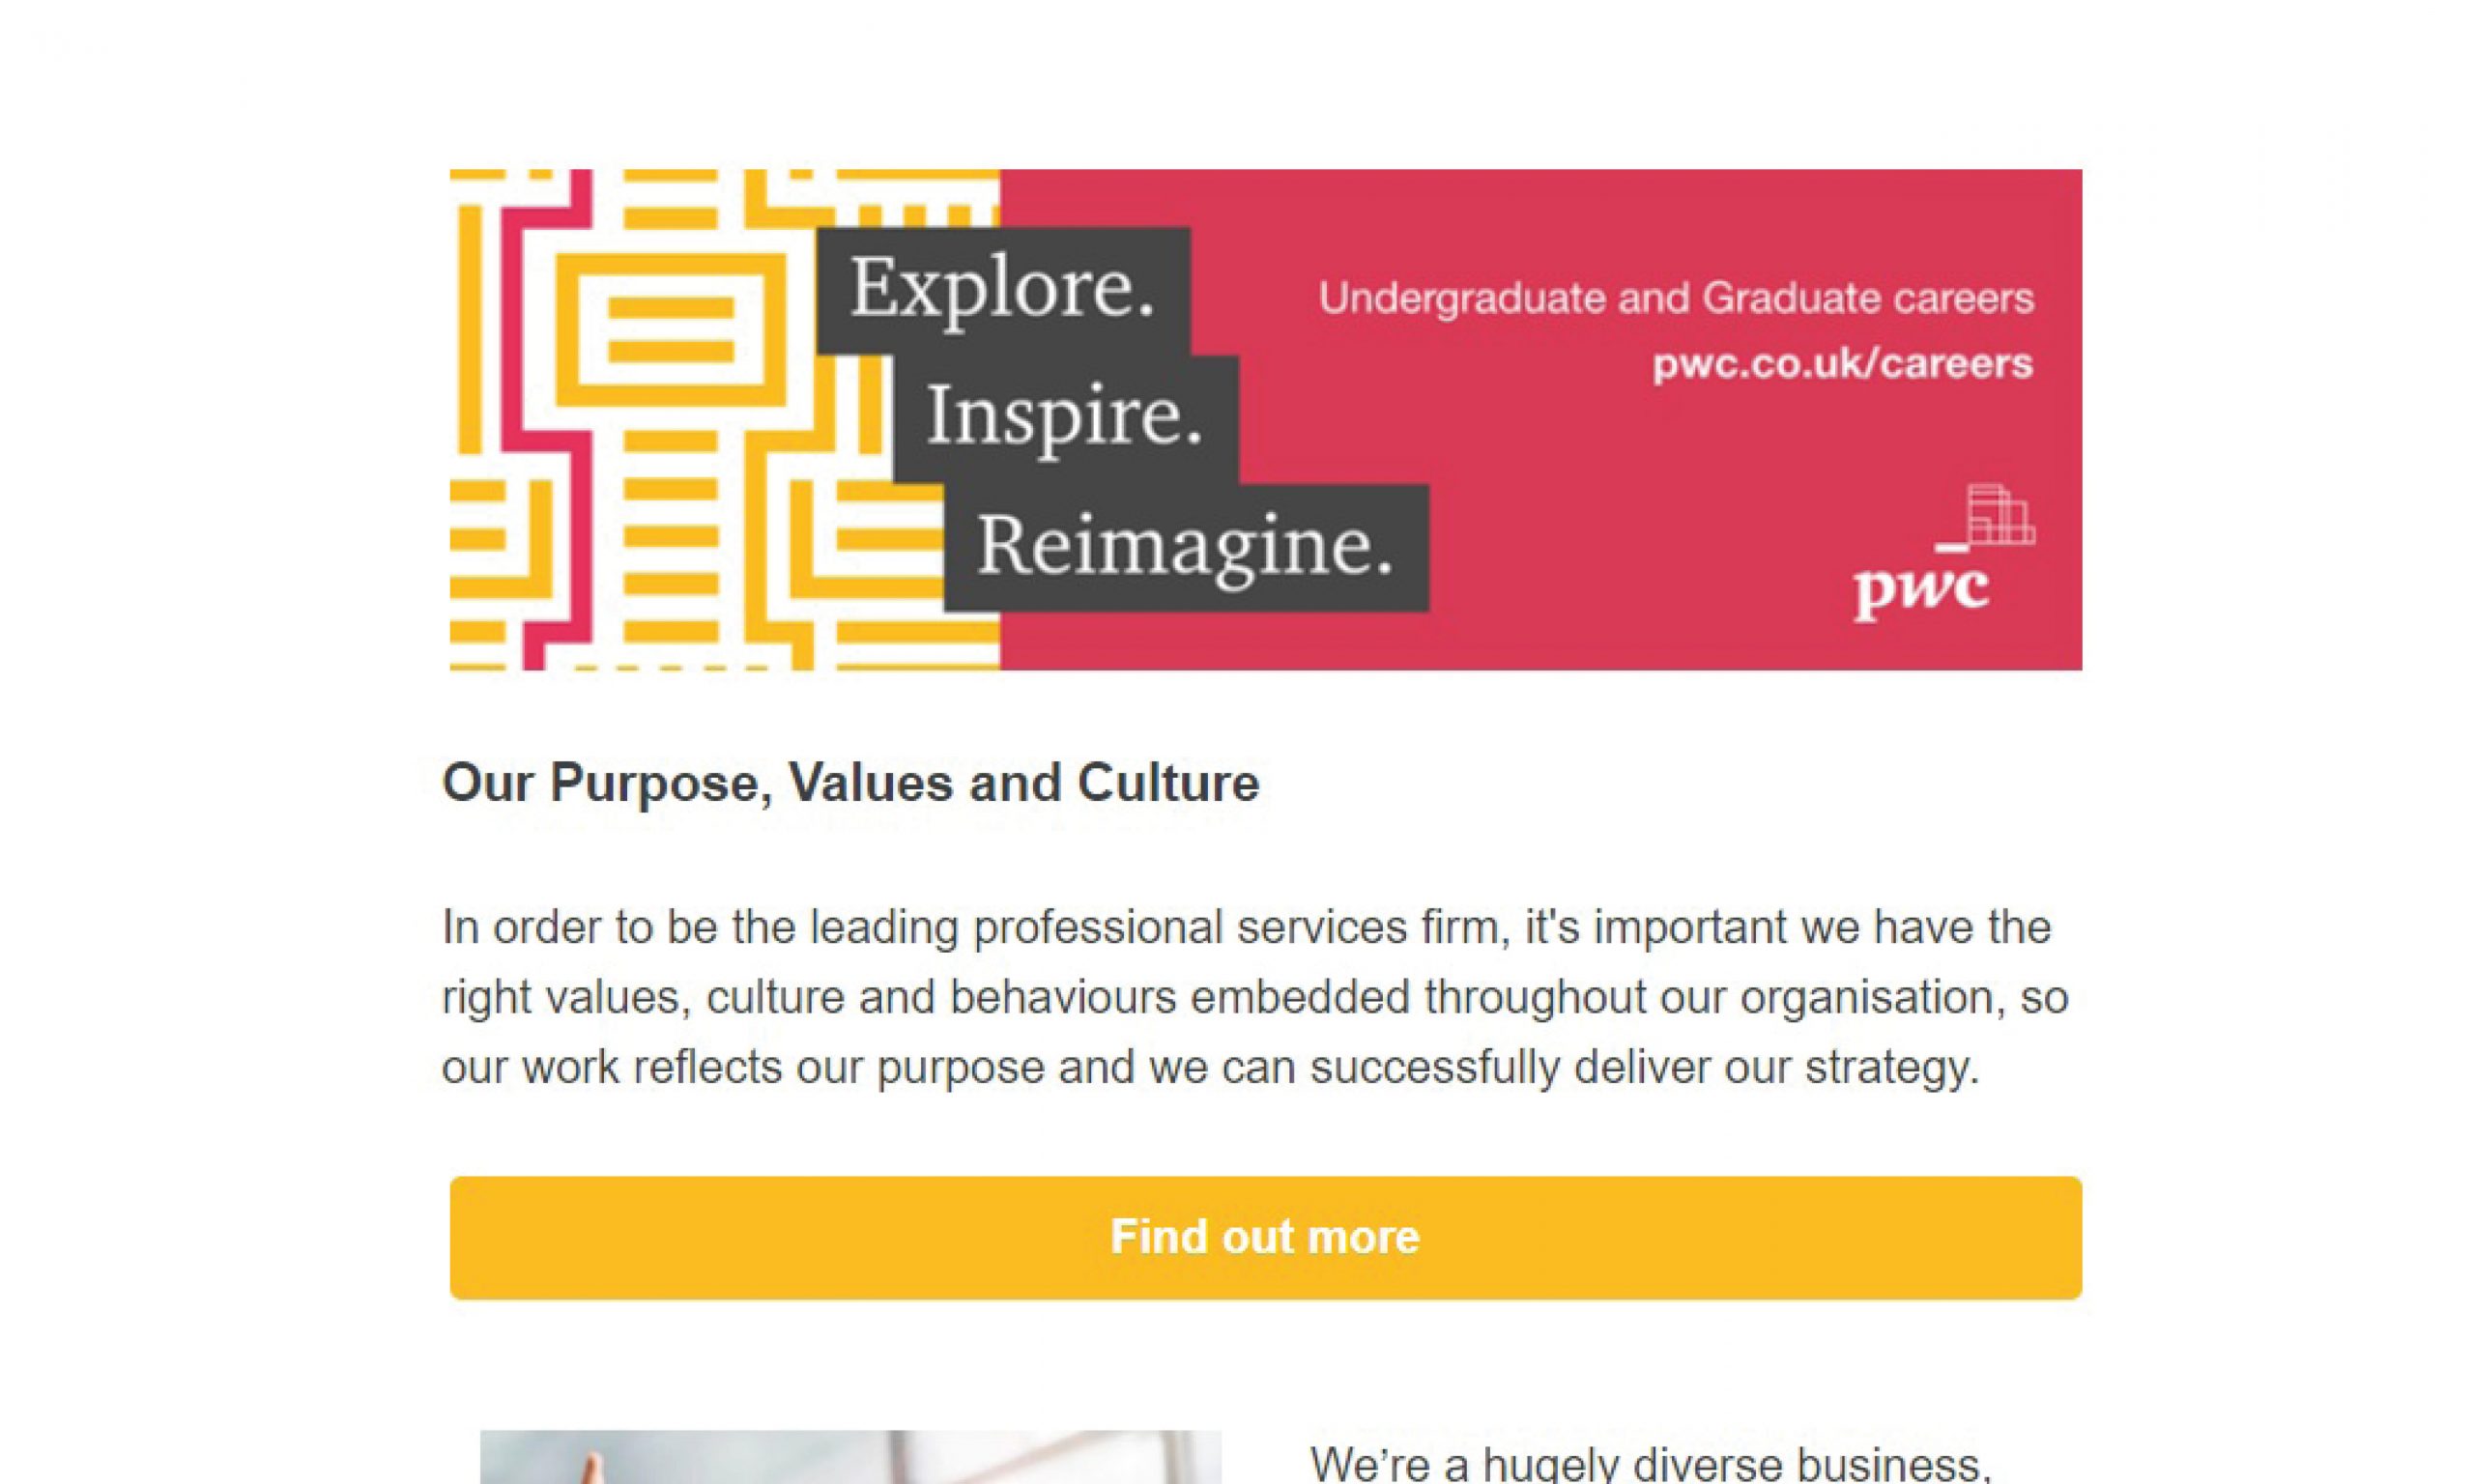 PwC - Our Purpose, Values and Culture